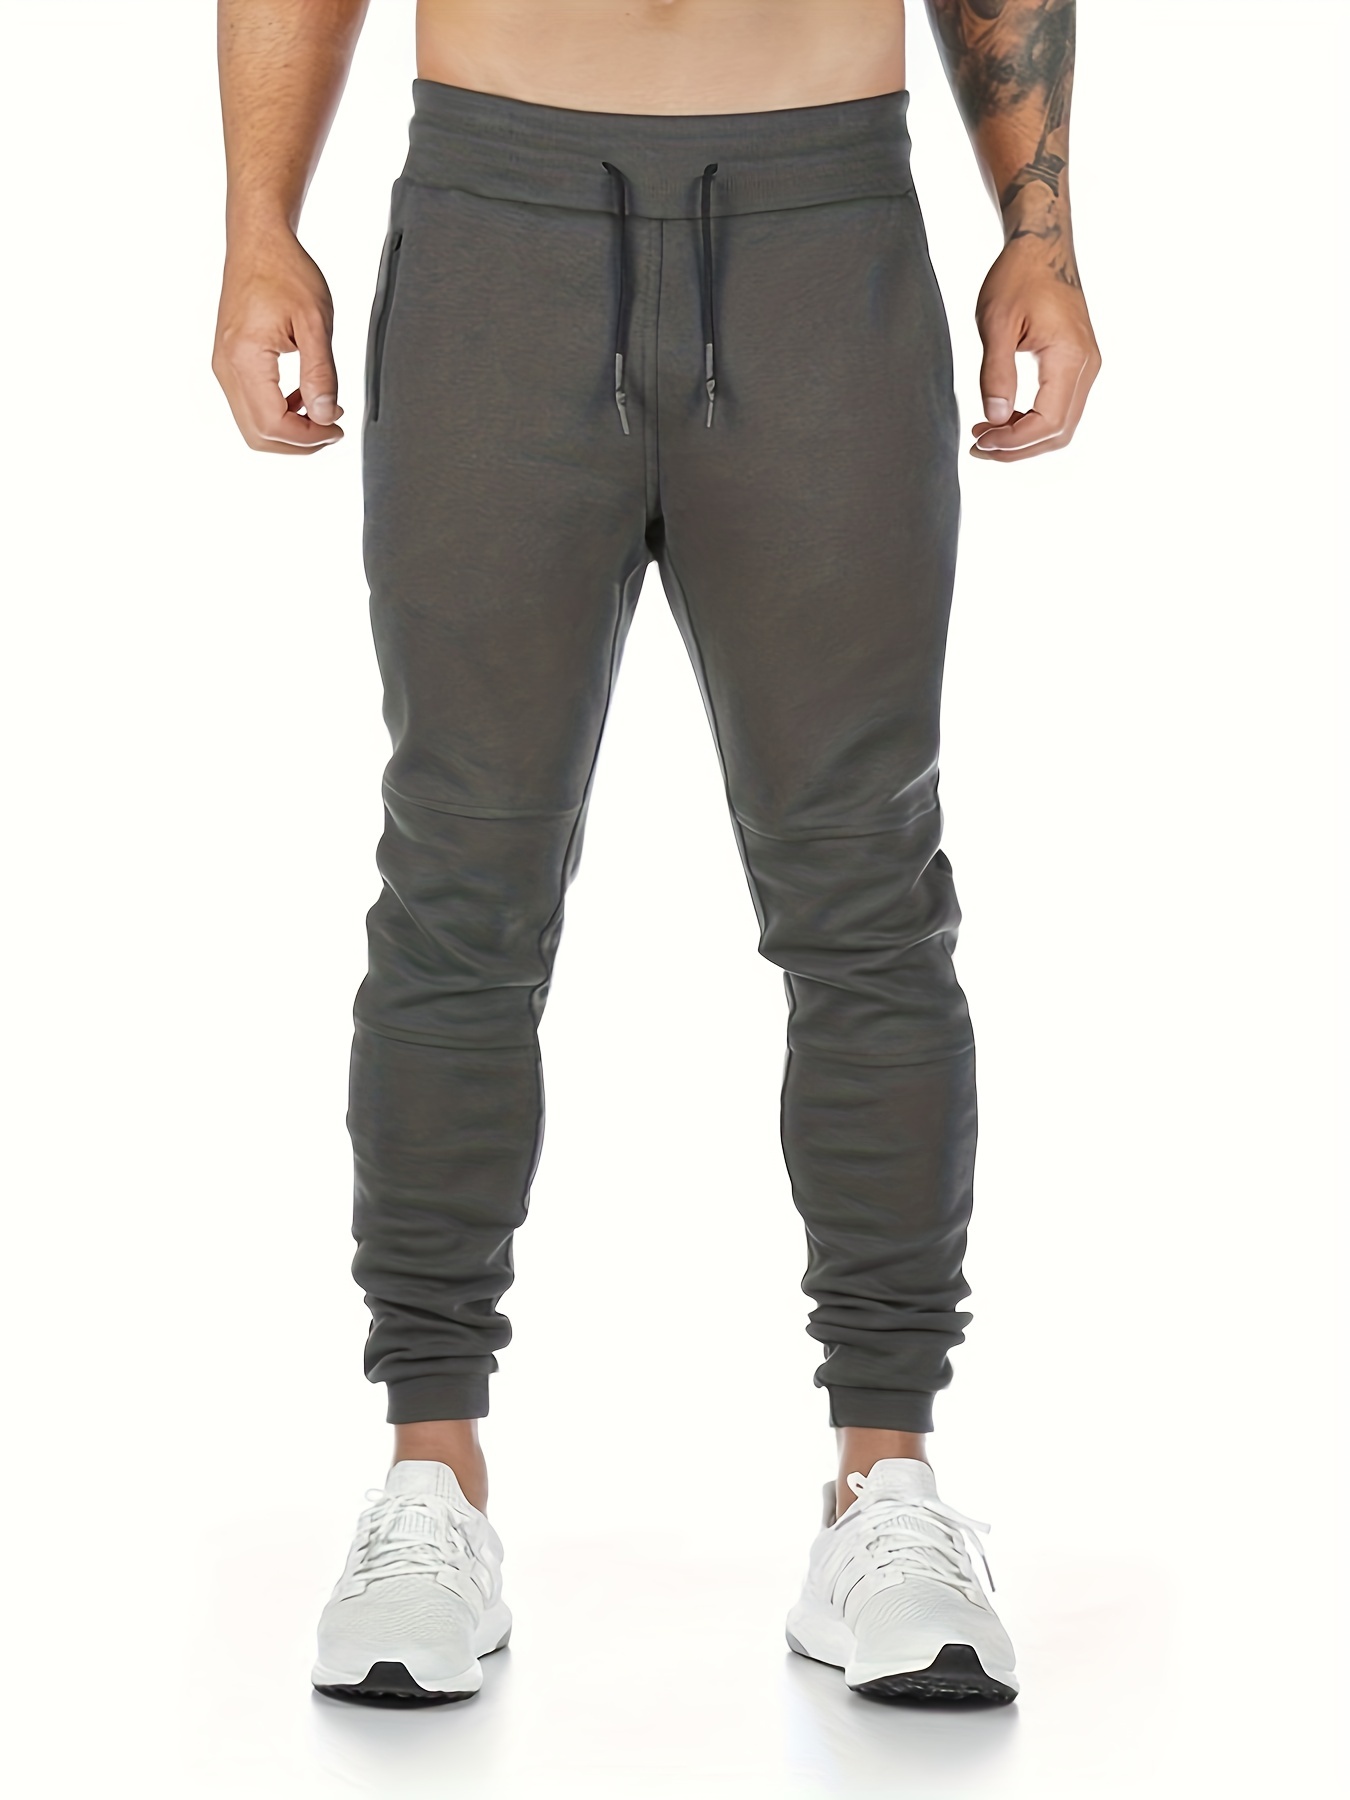 Men Slim Fit Joggers Cotton Pants Casual Workout Pants Comfortable Active  Sports Sweatpants with Pockets for Gym Training